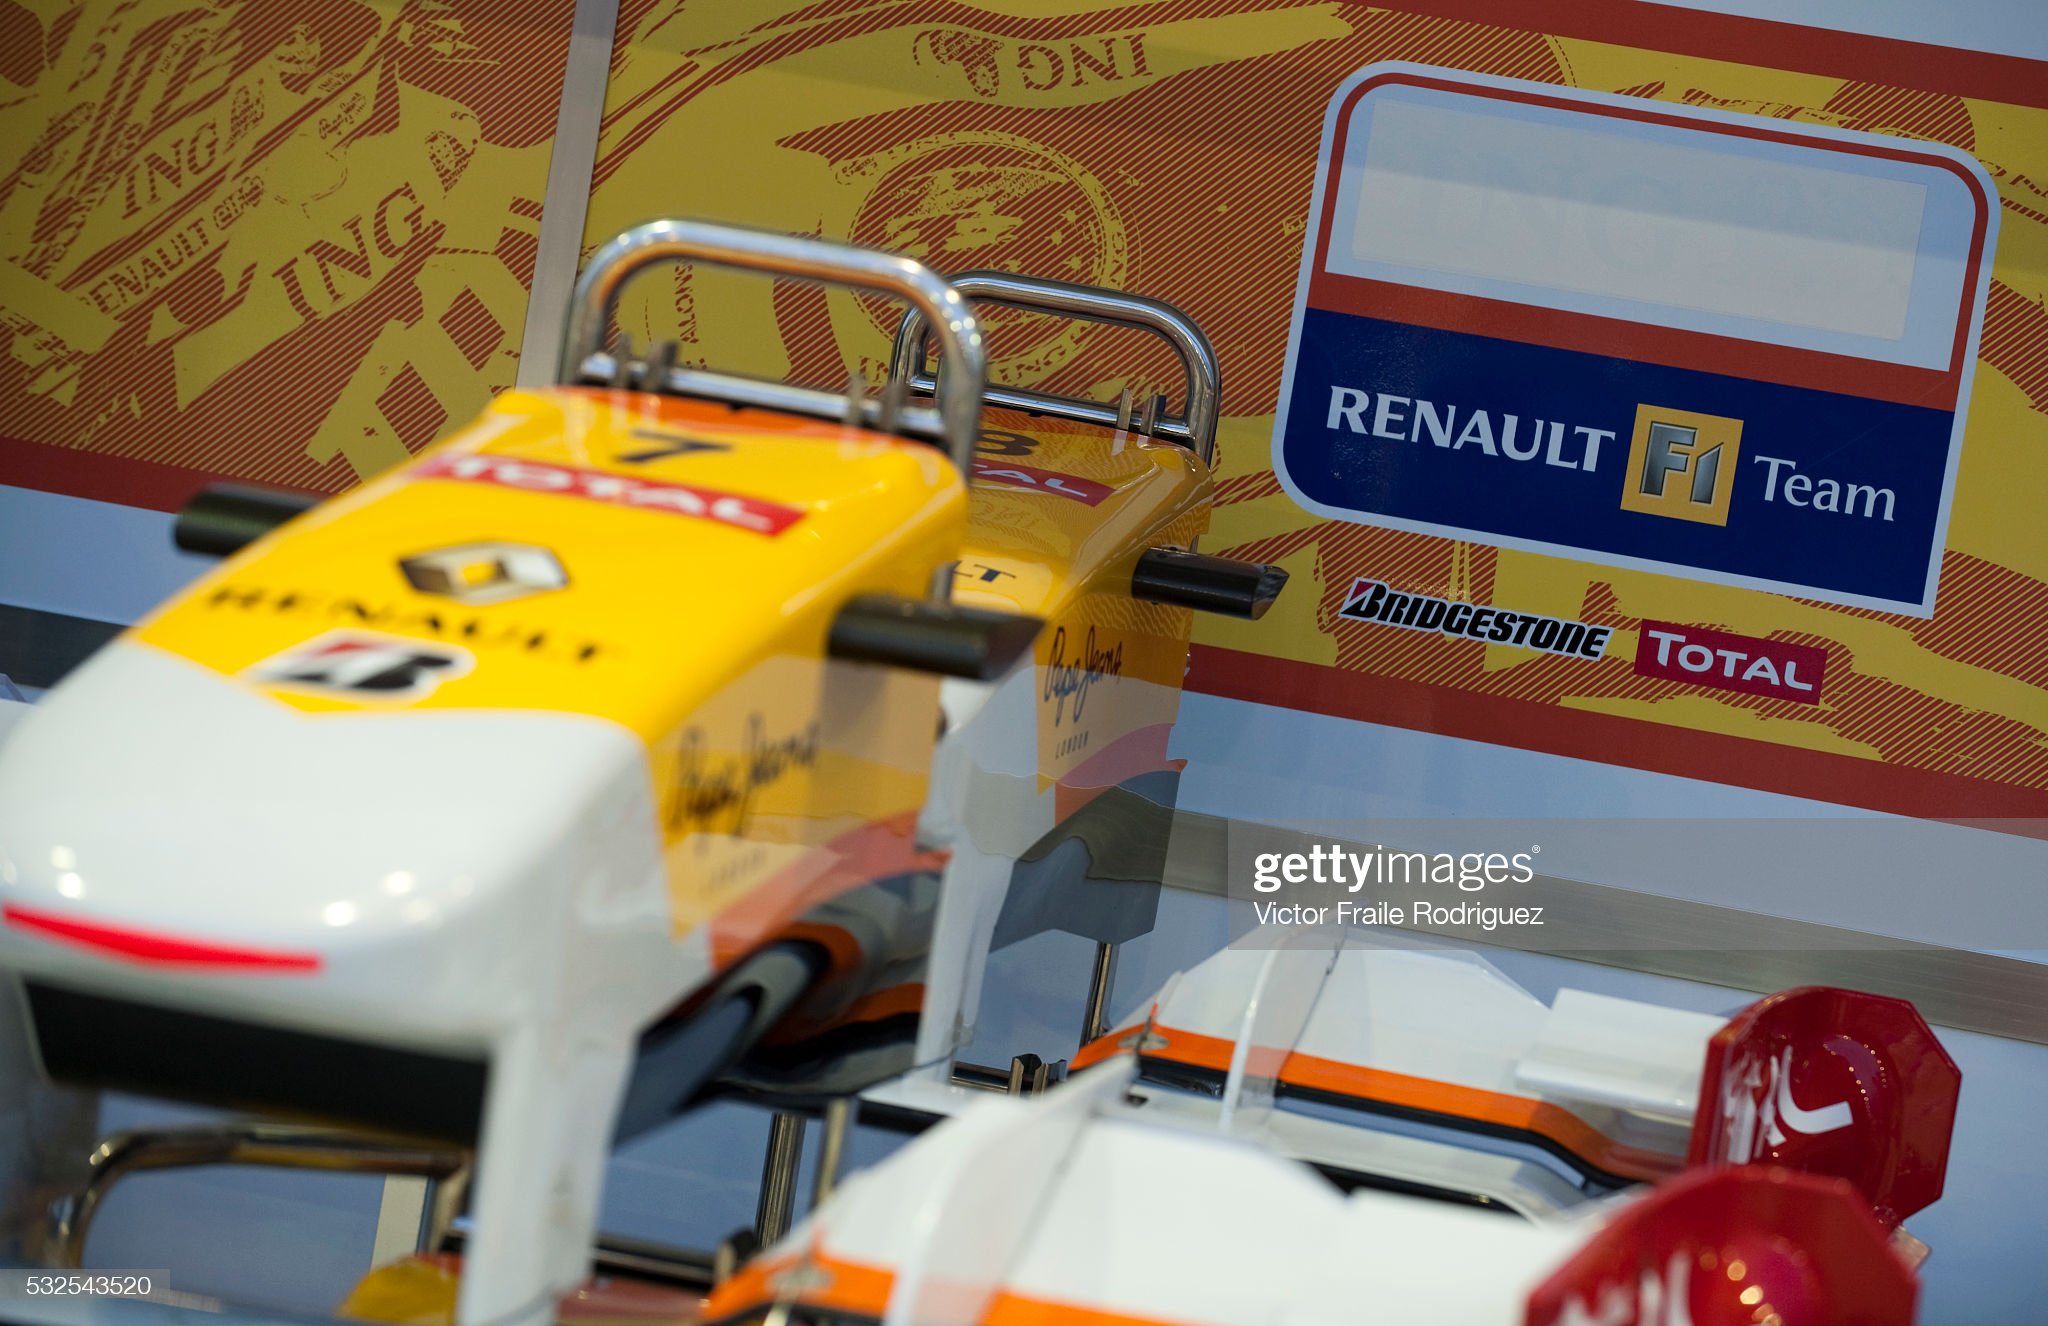 Renault Formula One cars are parked inside the pits without ING sponsor logos before the Formula One Singapore Grand Prix, the world's only street night race, at the Marina Bay street circuit on 27 September 2009. Renault suffered further fallout from a race-fixing scandal when sponsors ING and Mutua Madrilena retired their contracts. 